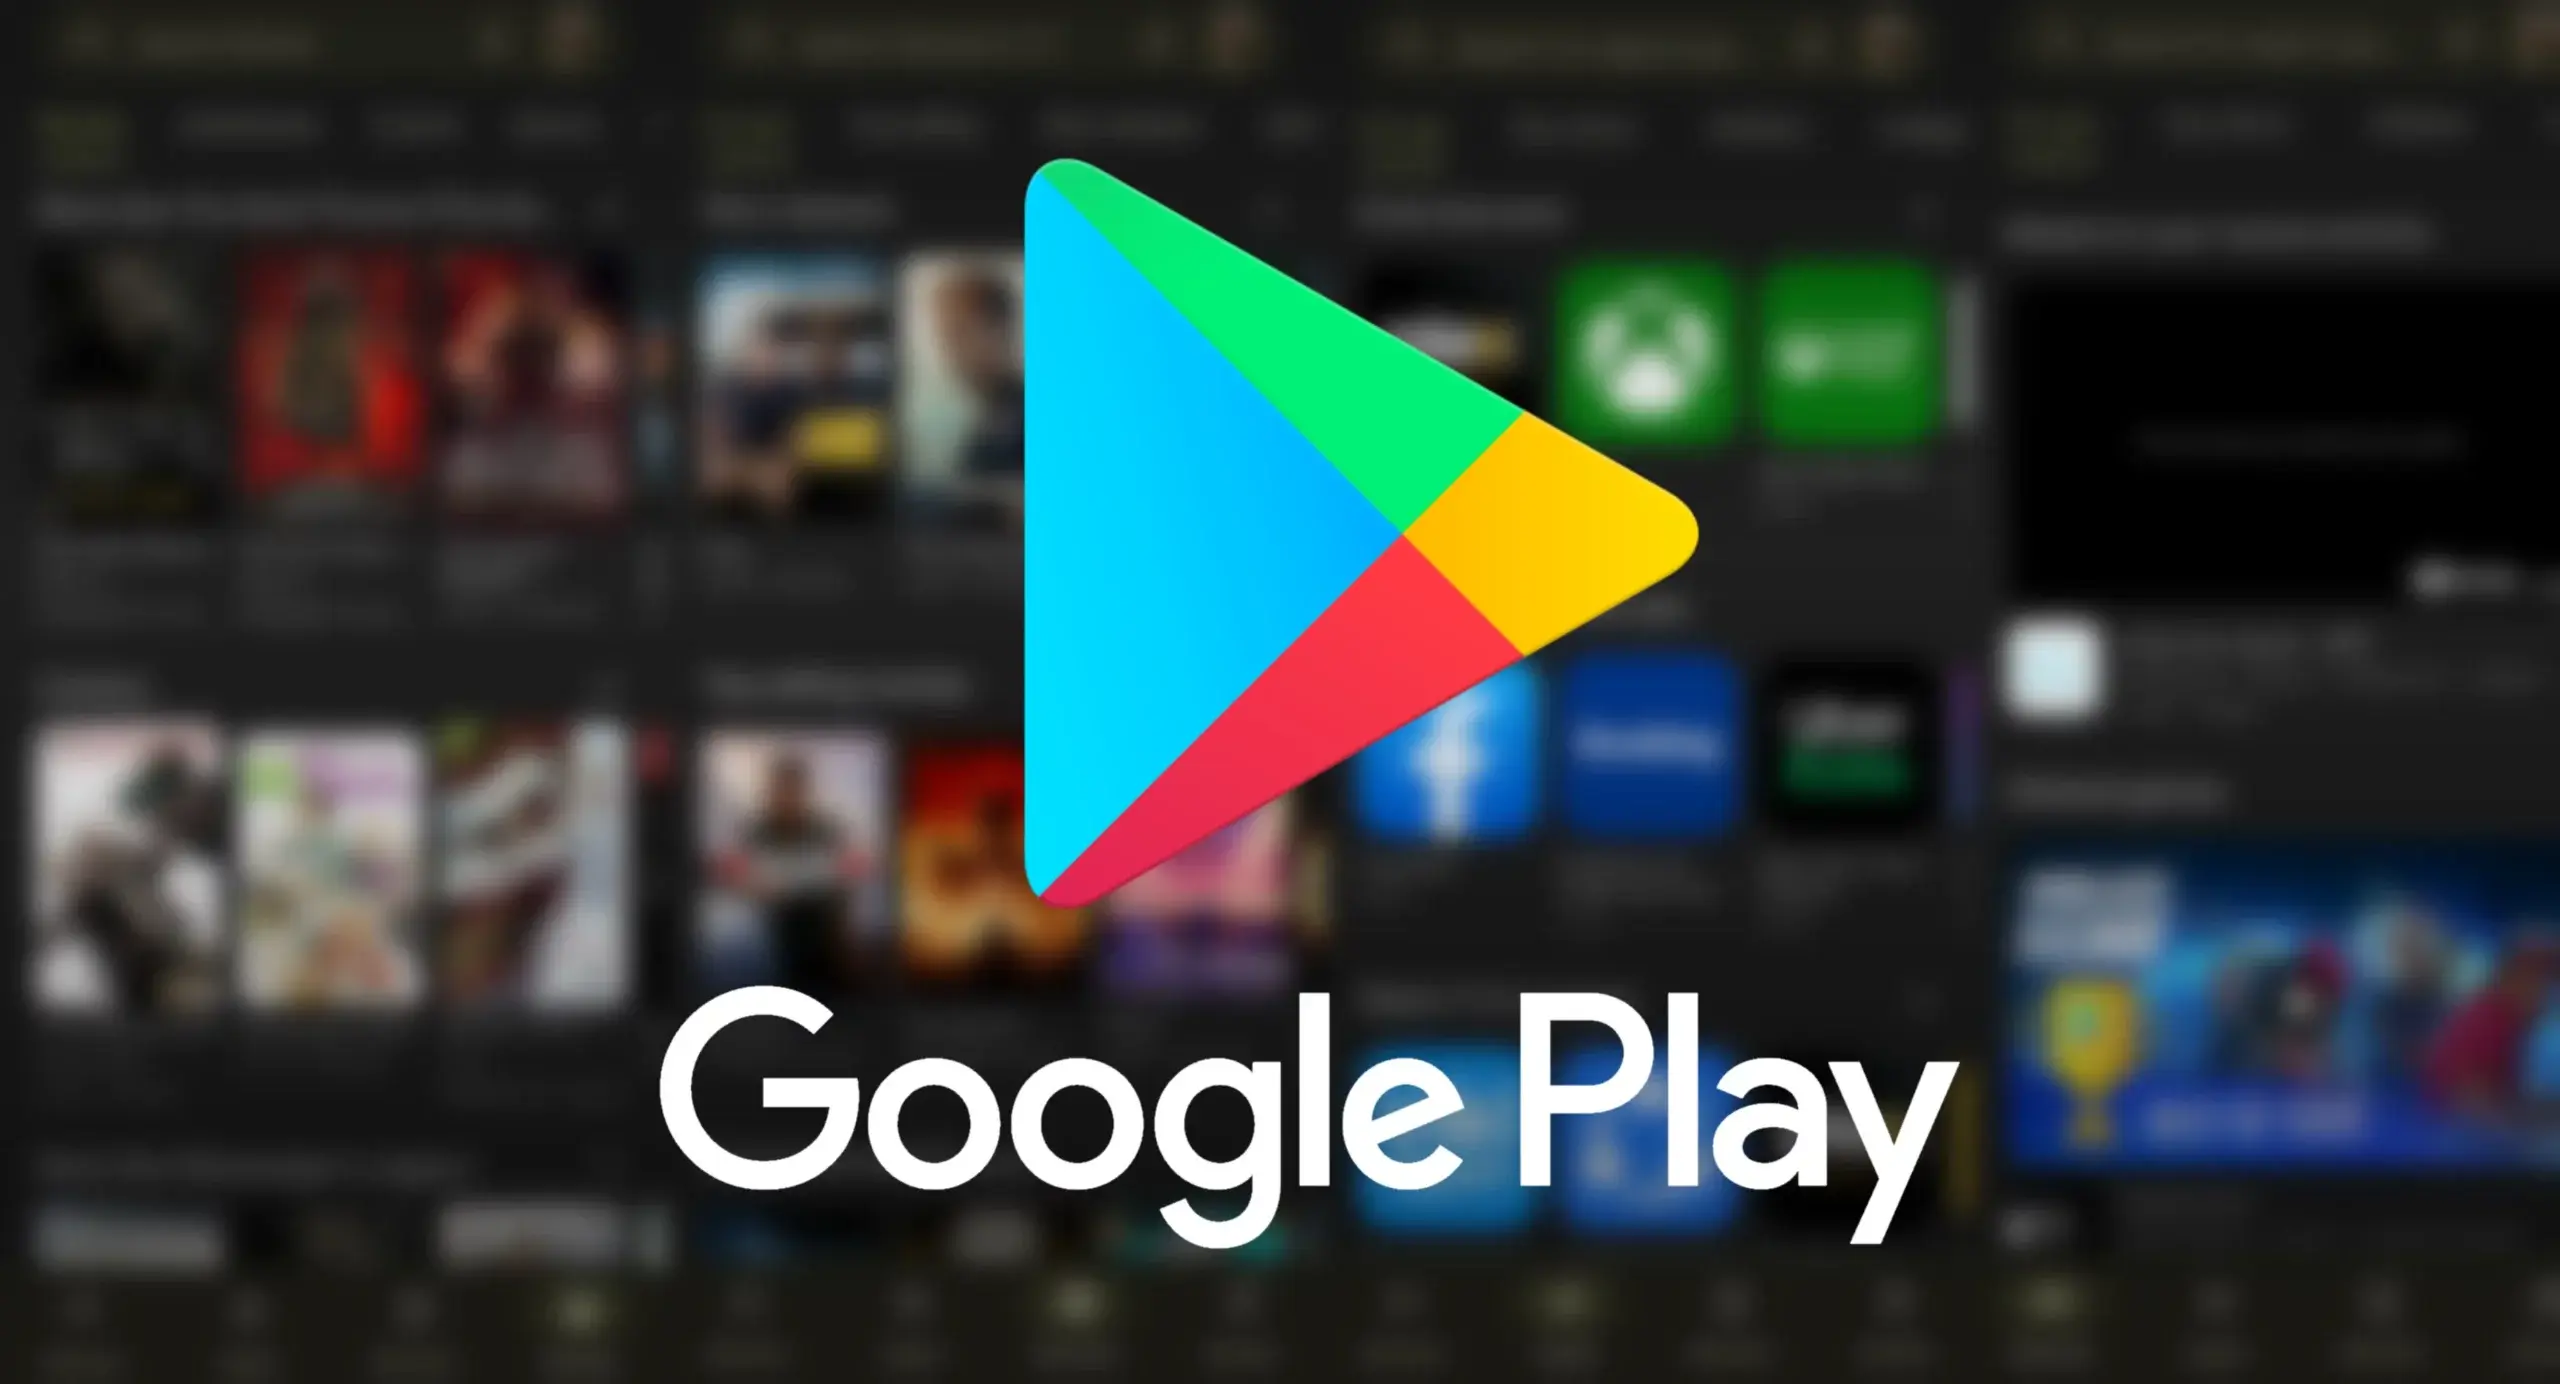 Google Play Store 36.3.12 APK now rolling out - Gizmochina